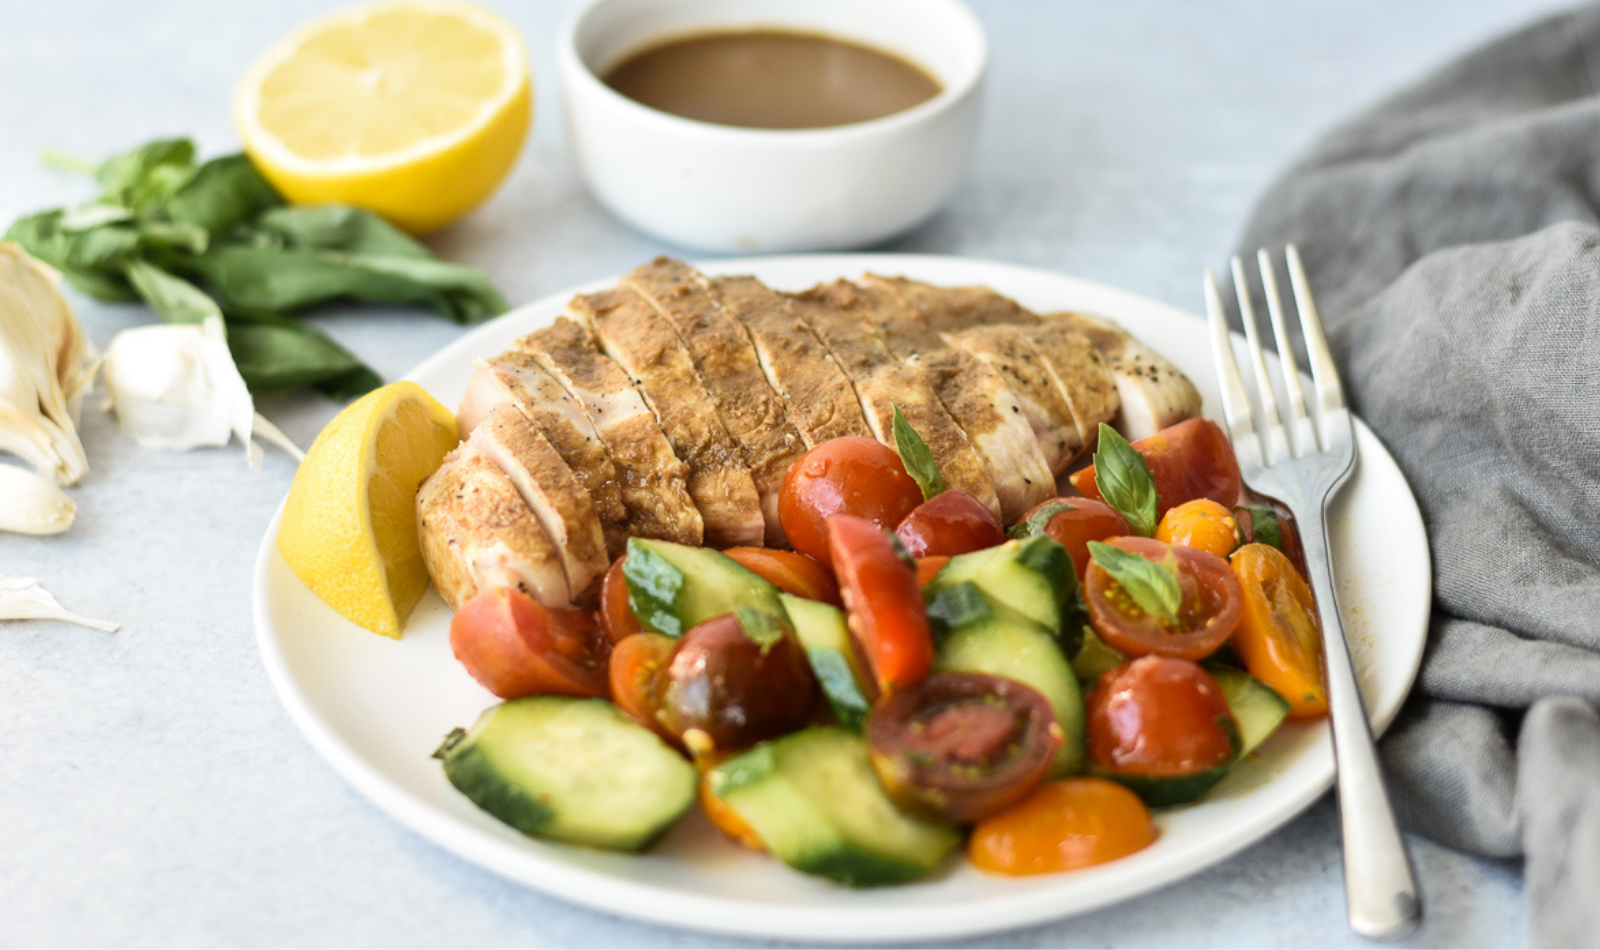 Blog Featured Image - Heirloom Tomato Salad with Balsamic Chicken